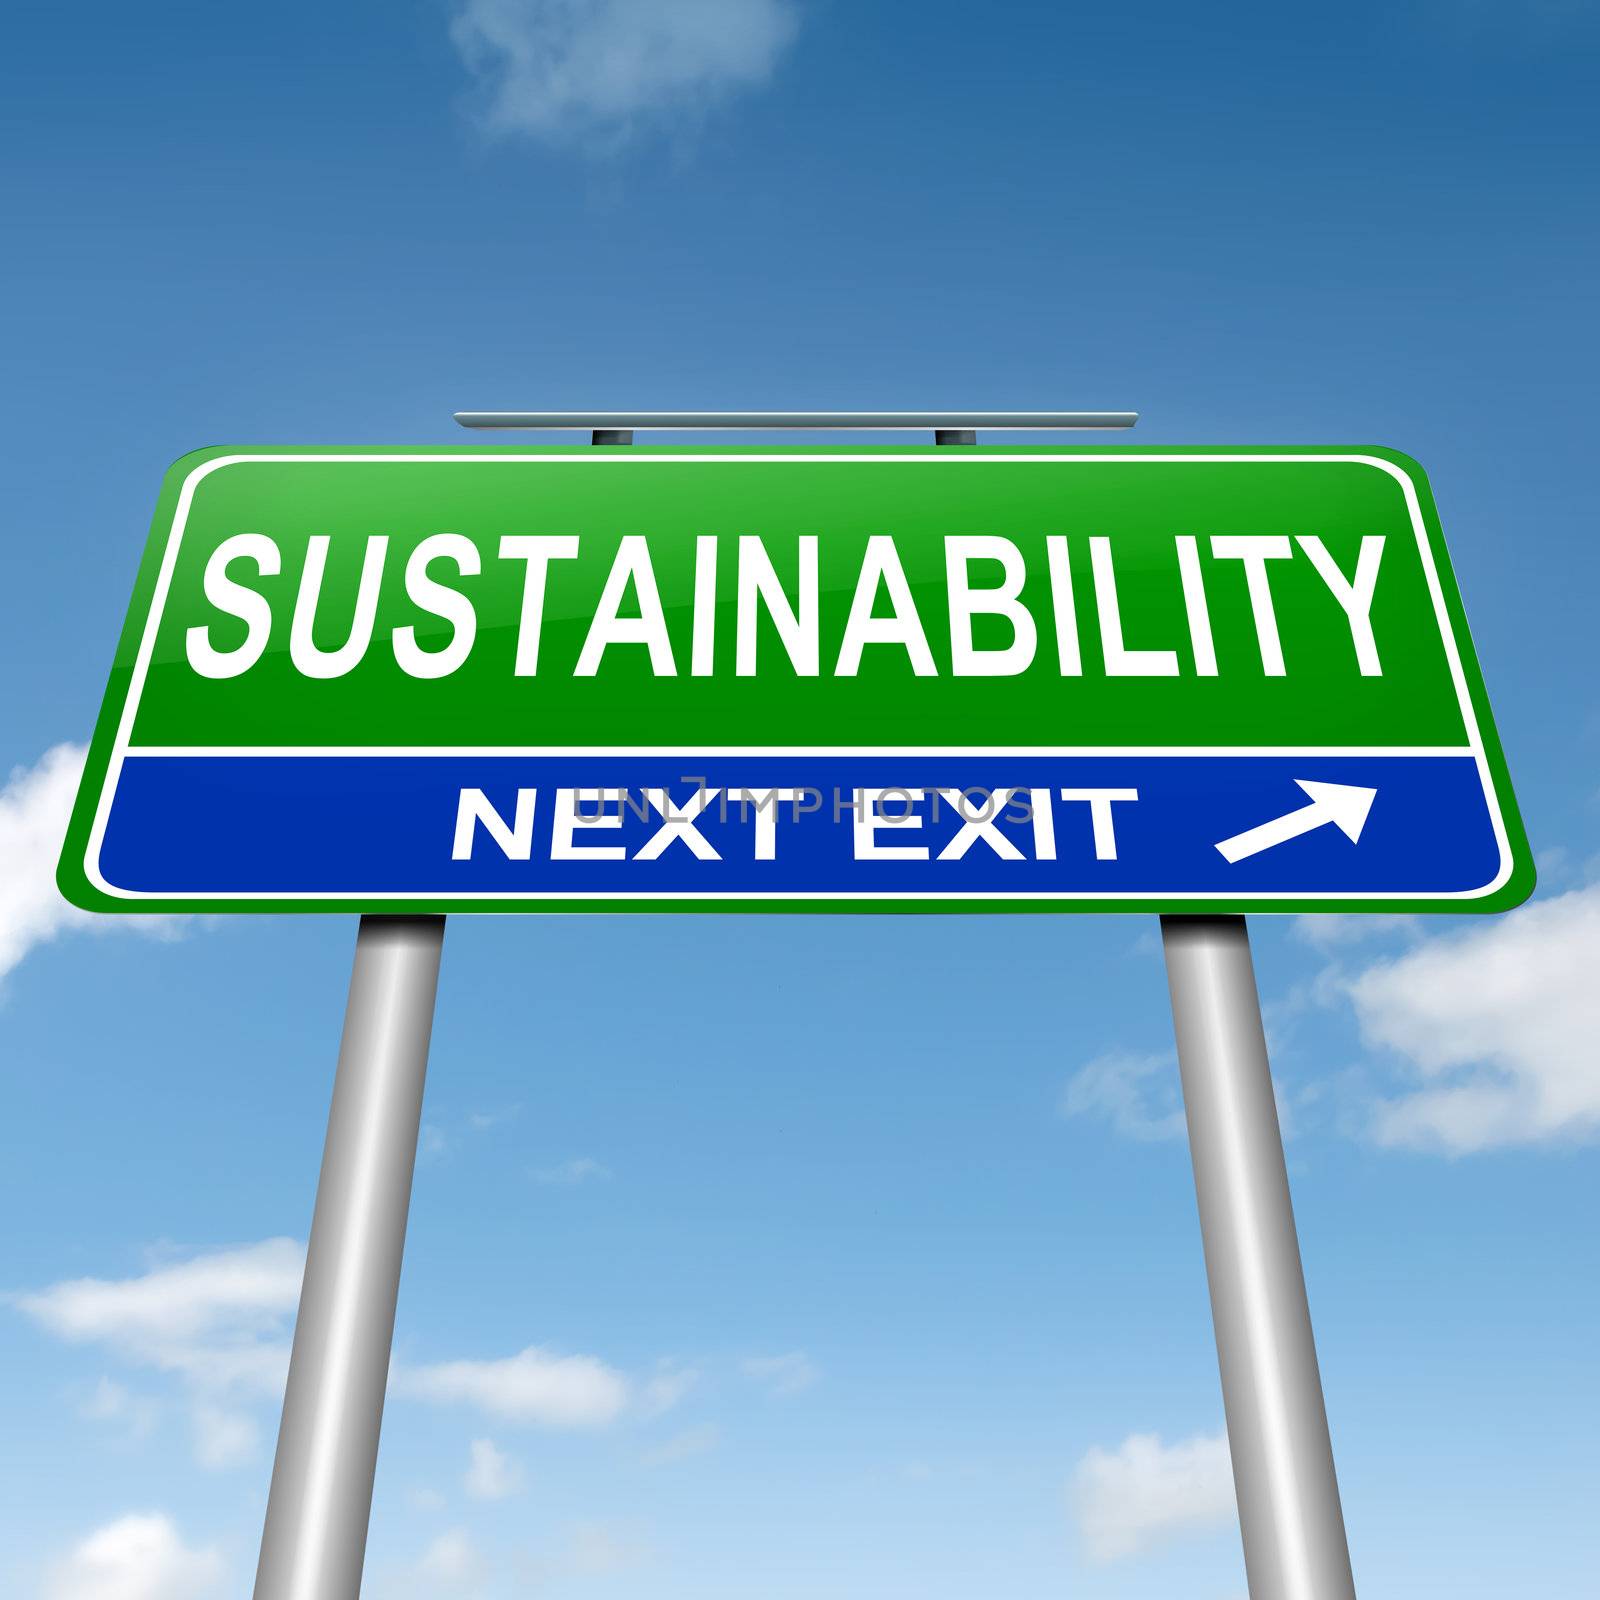 Illustration depicting a roadsign with a sustainability concept. Sky background.